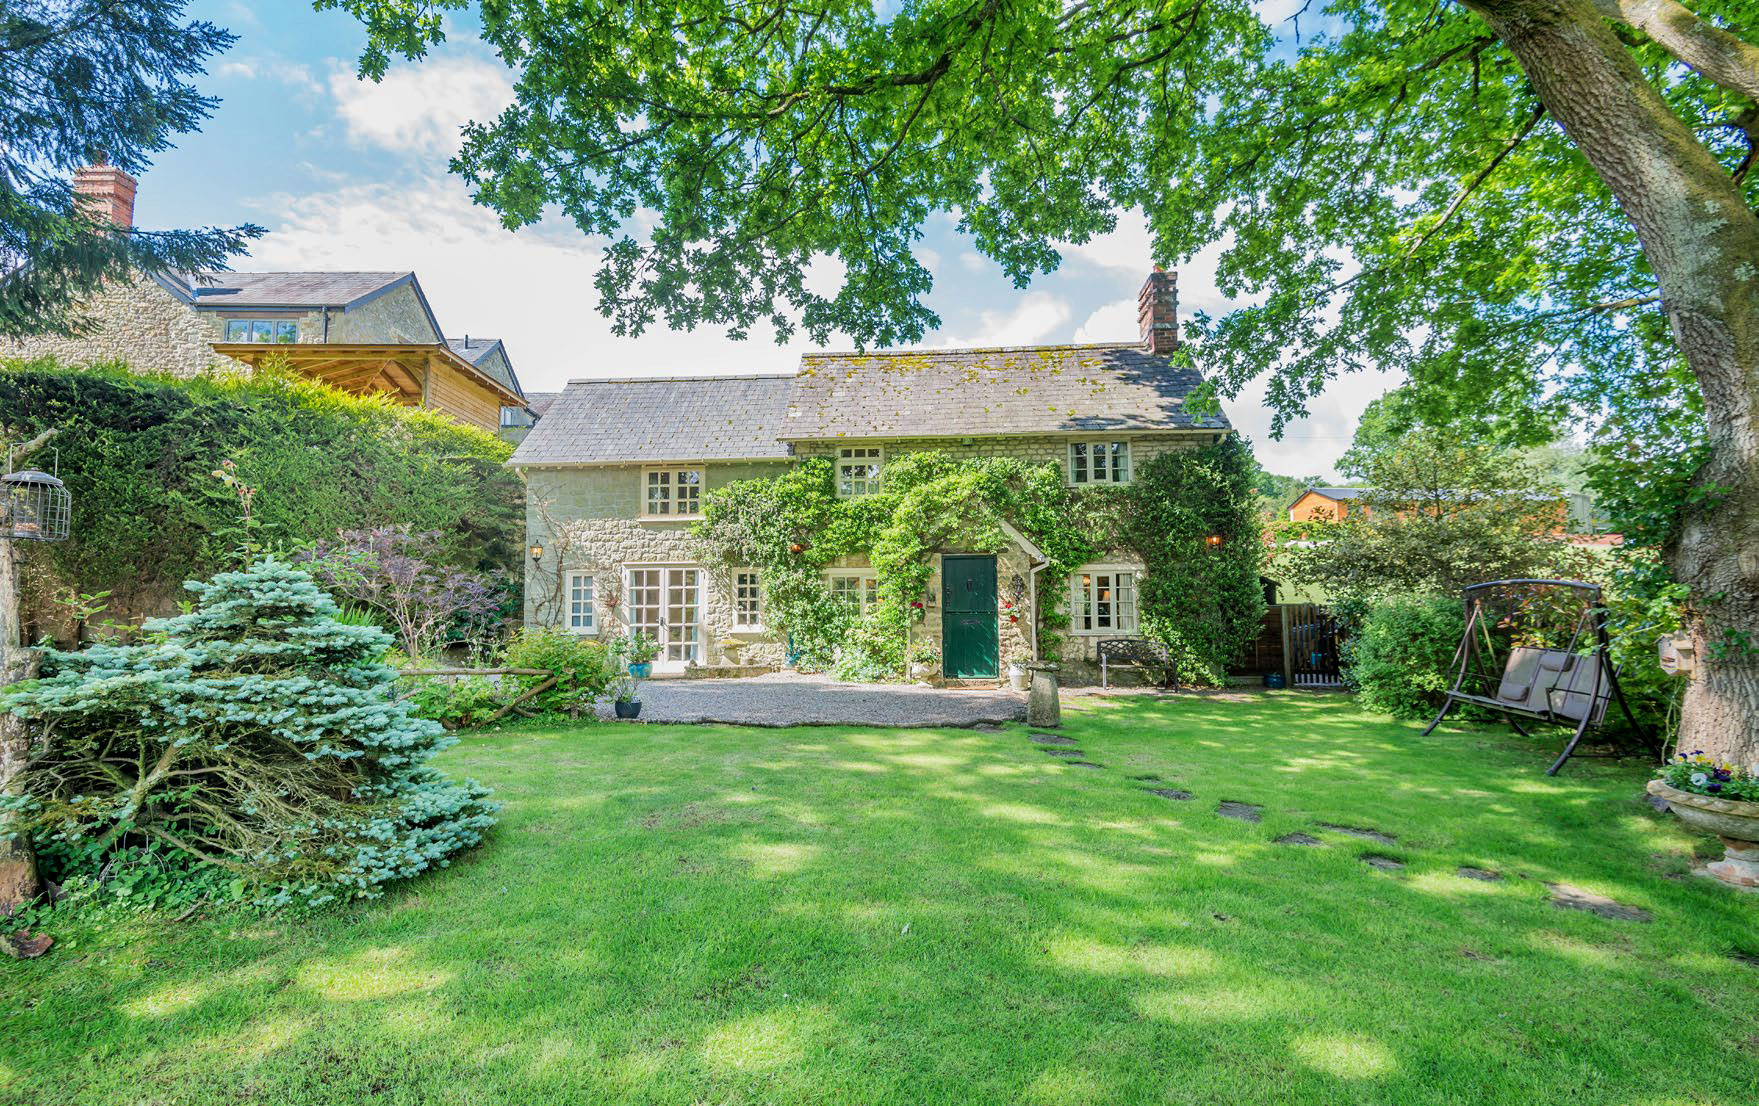 21 Wonderful Homes For Sale As Seen In Country Life, Starting From Just £250,000